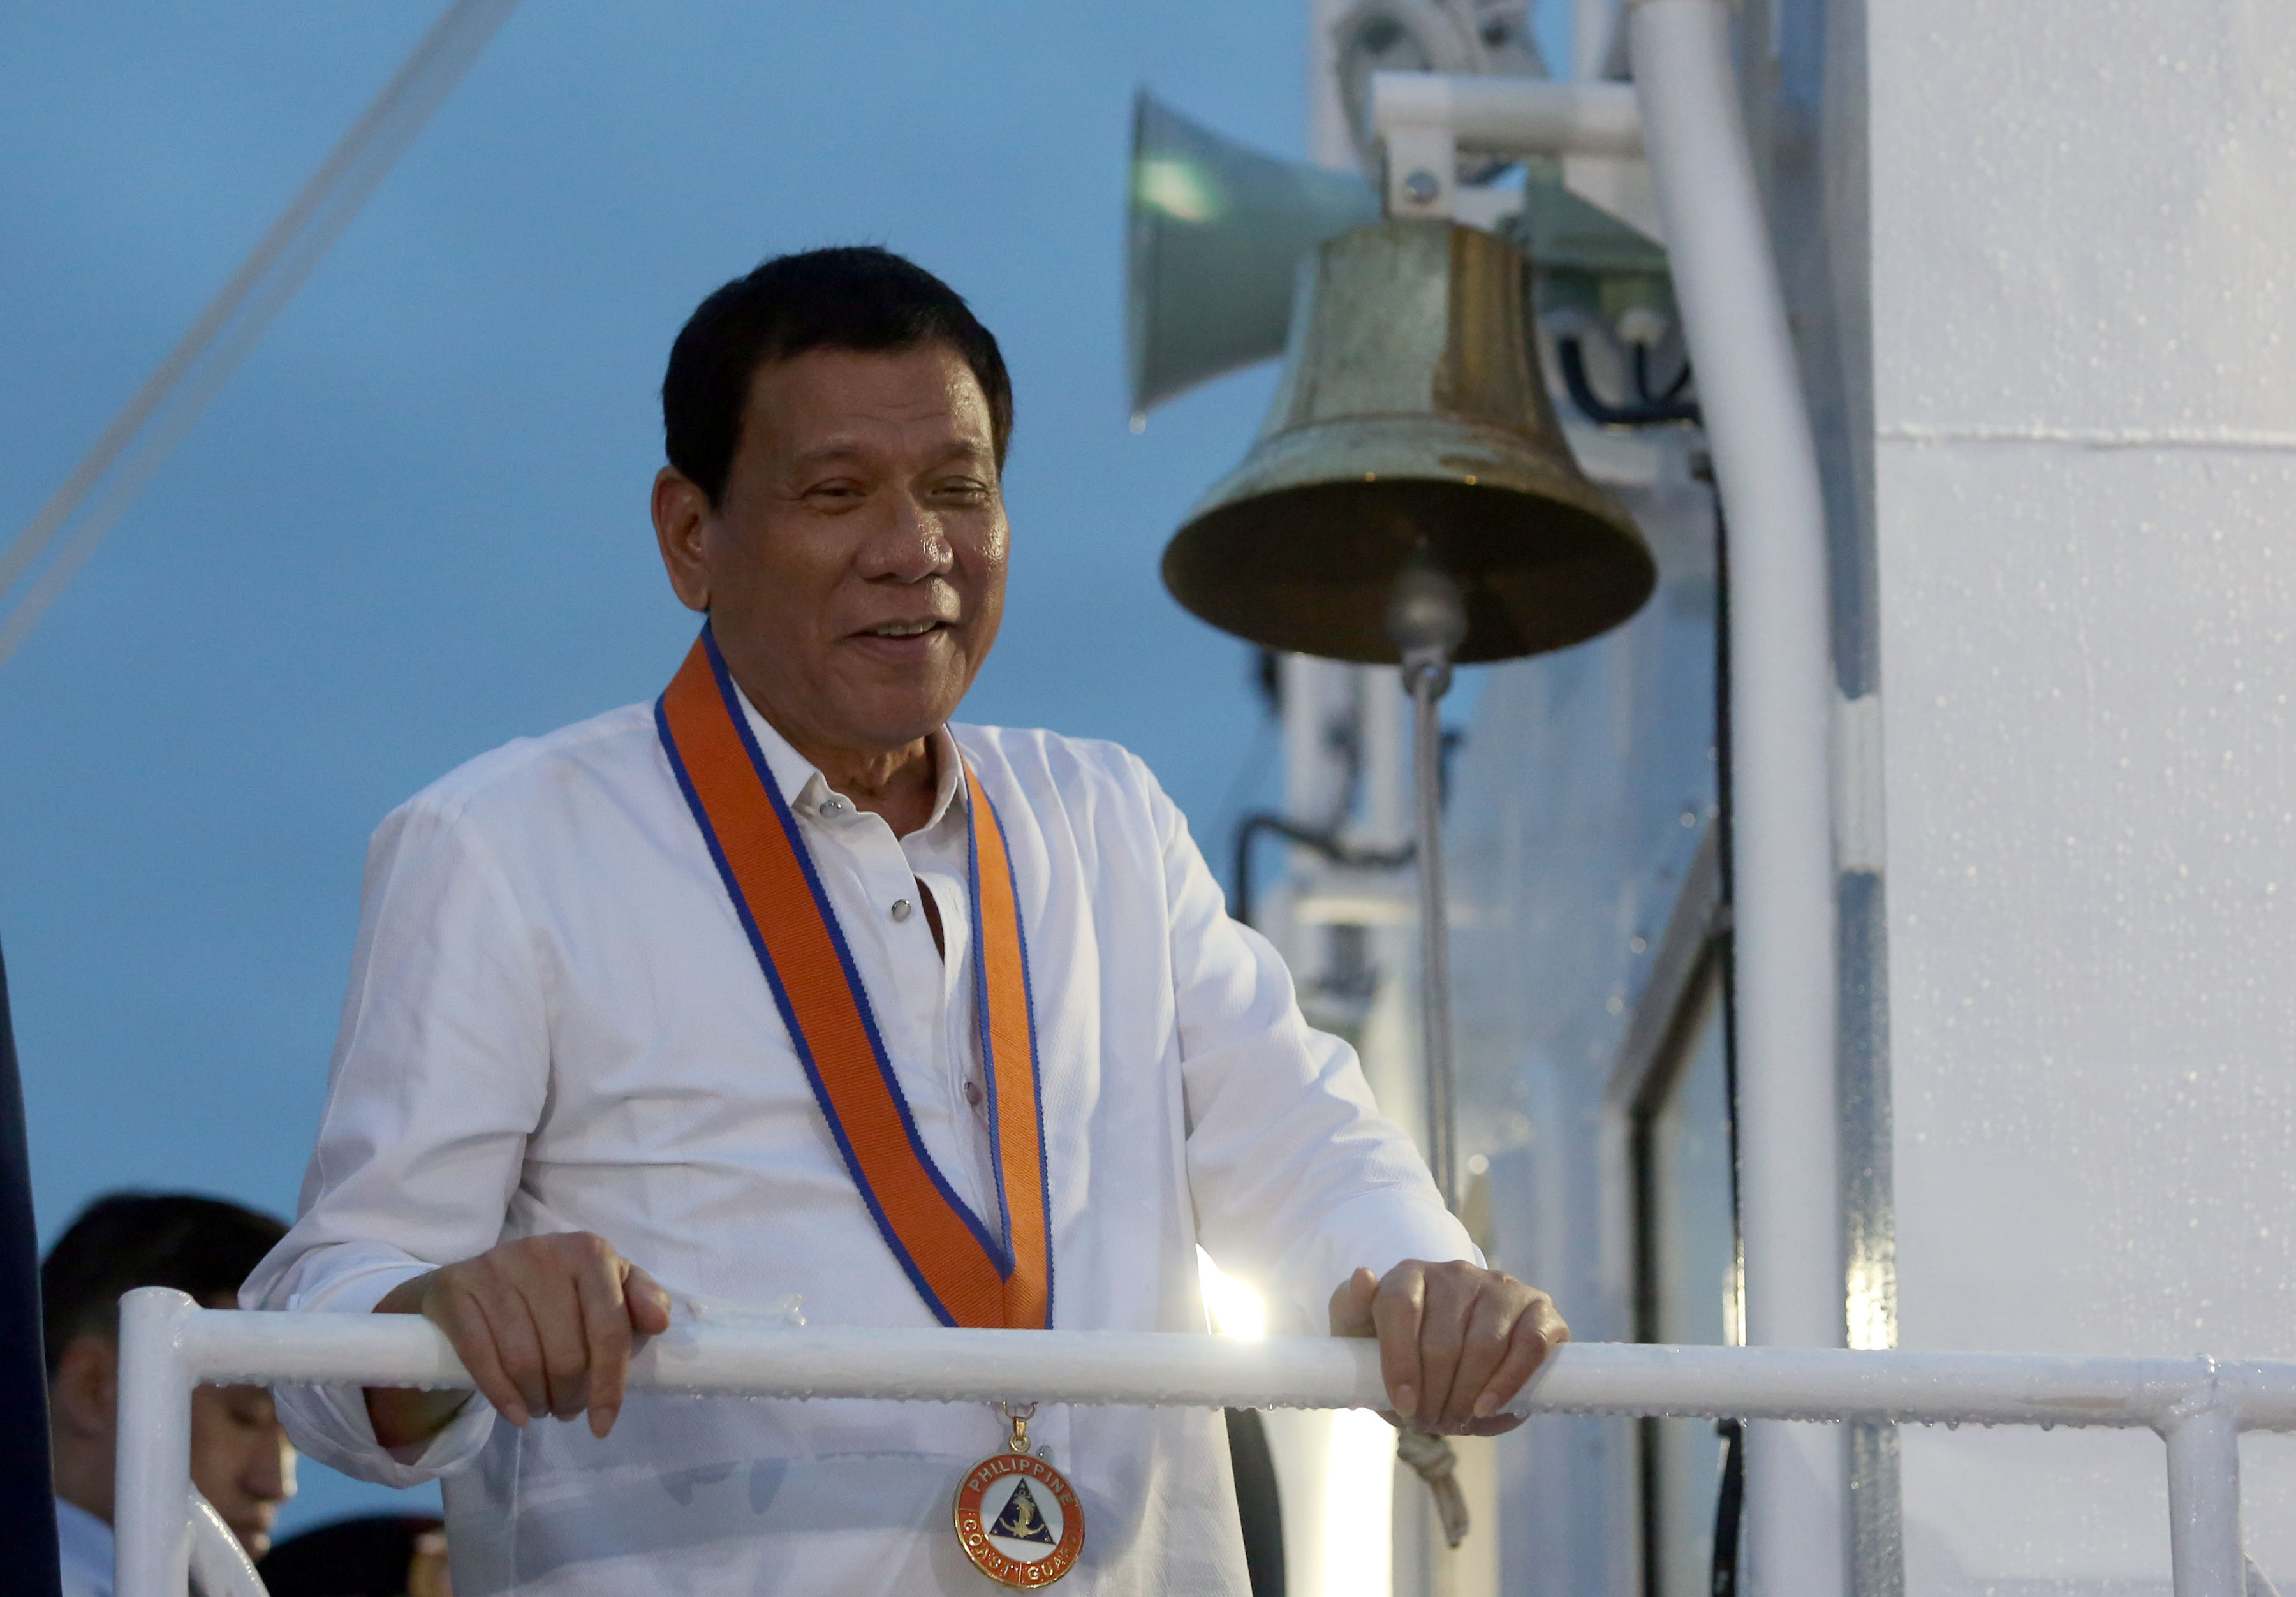 OFF TO CHINA. President Rodrigo Duterte beams as he leads the inspection of Barko ng Republika ng Pilipinas (BRP) Tubbataha during the 115th anniversary of the Philippine Coast Guard on October 12, 2016. File photo by Rey Baniquet/Presidential Photo  